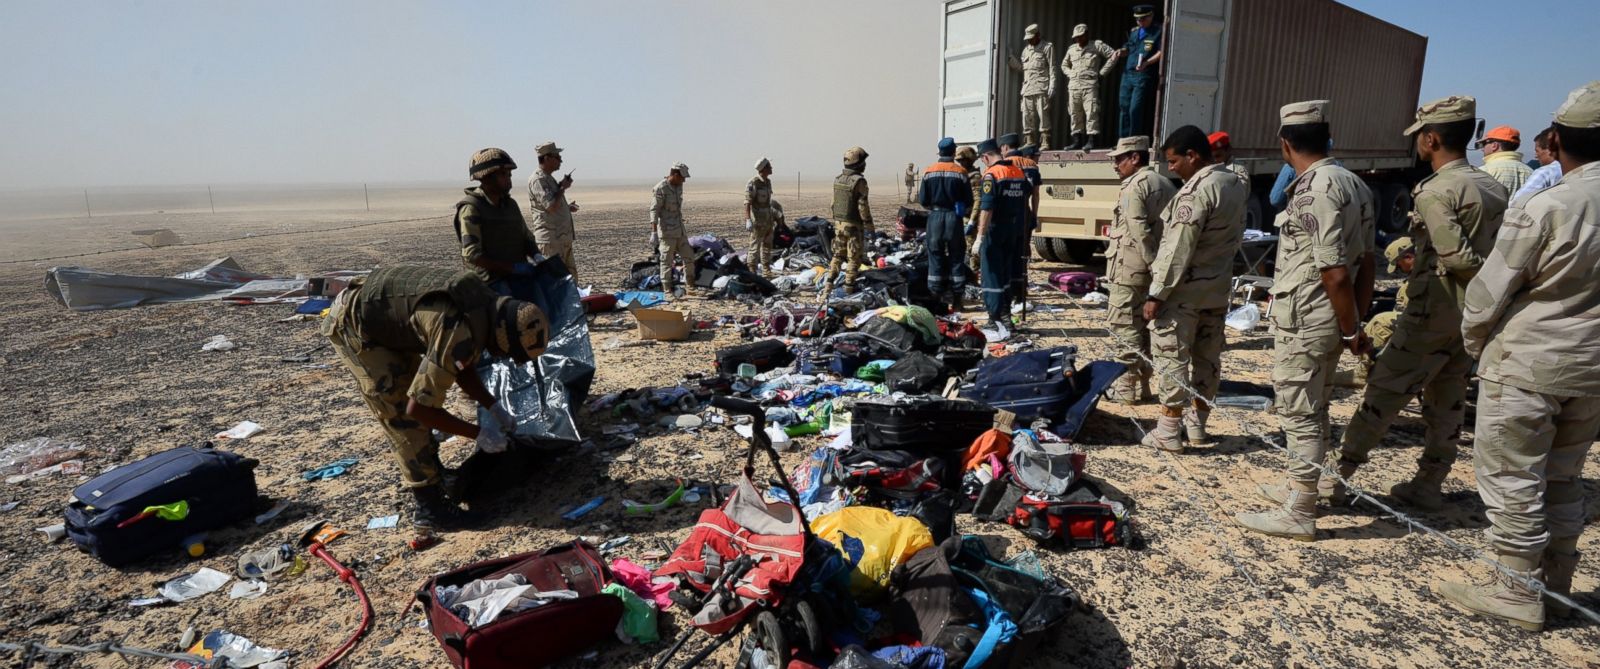 PHOTO: Egyptian soldiers collect personal belongings of plane crash victims at the crash site of a passenger plane bound for St. Petersburg in Russia that crashed in Hassana, Egypts Sinai Peninsula, Nov. 2, 2015.